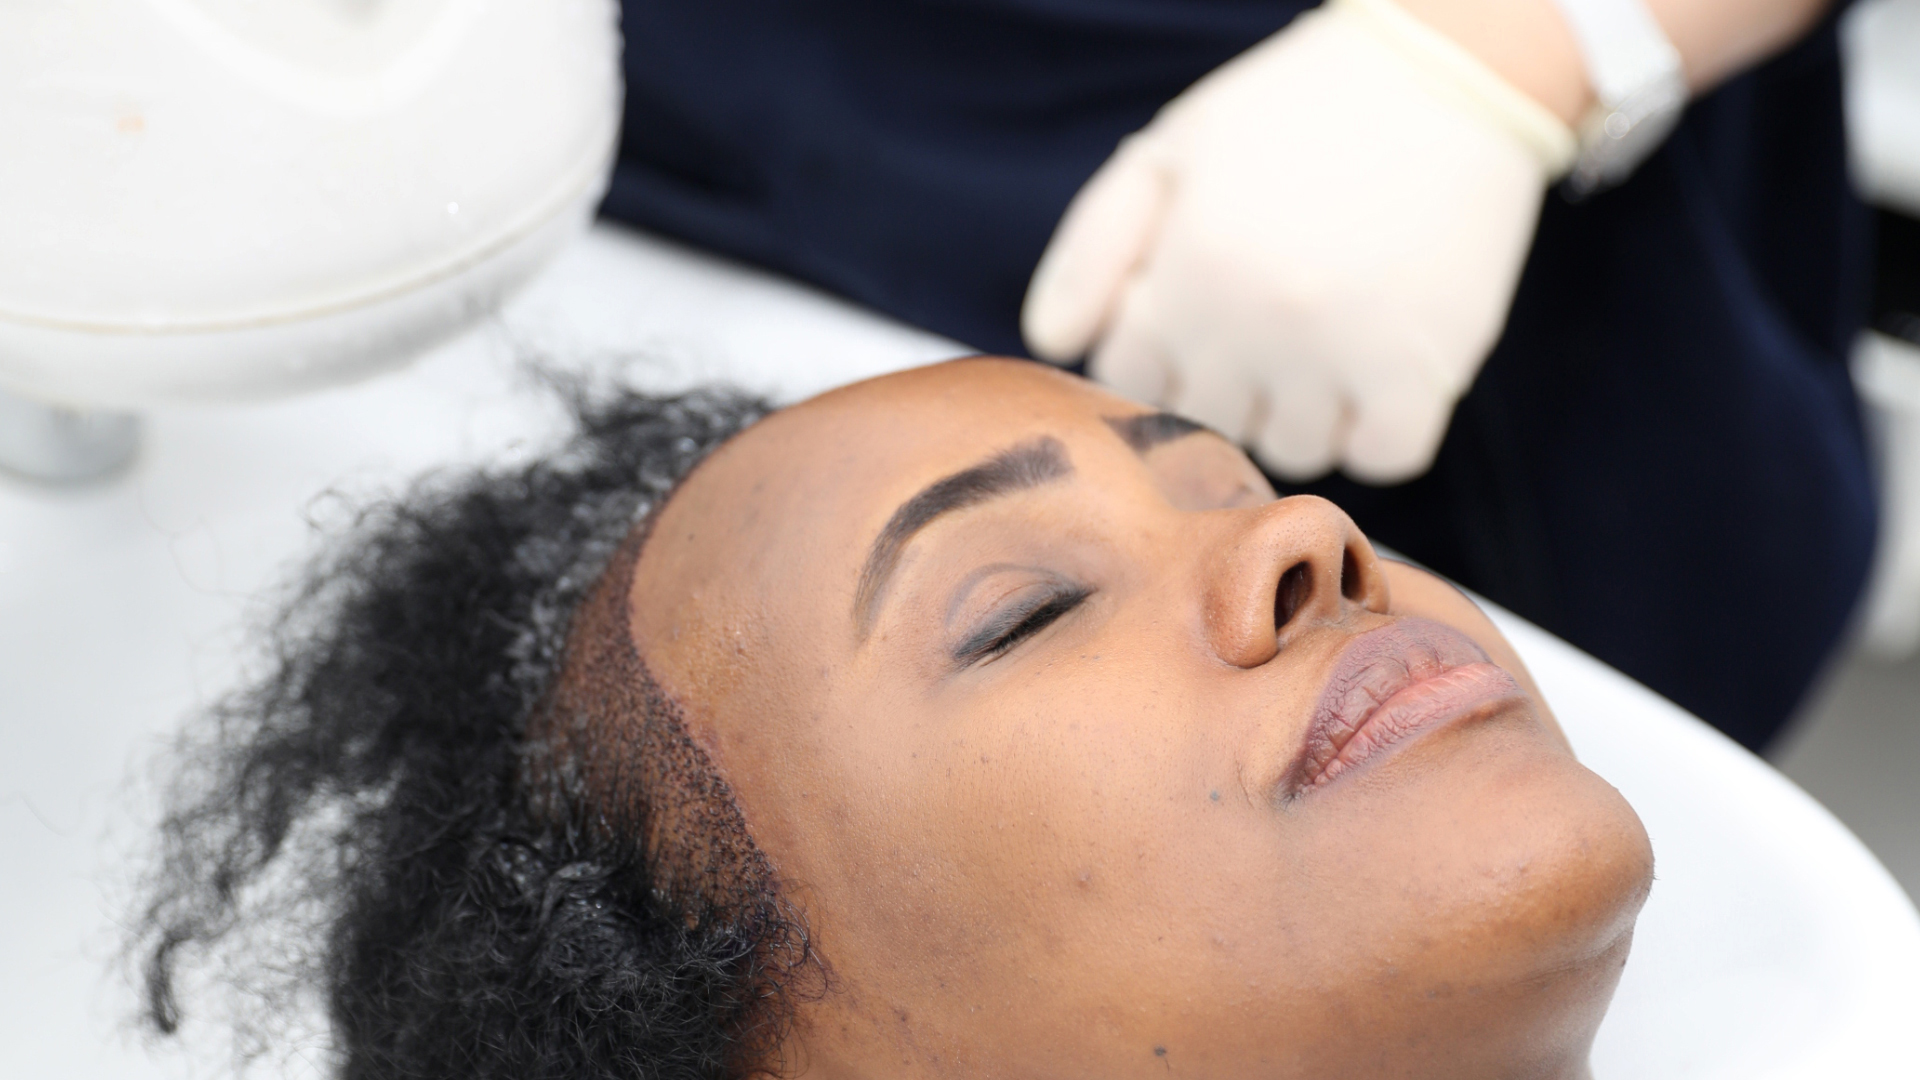 Hair transplant give good results for patient with traction alopecia